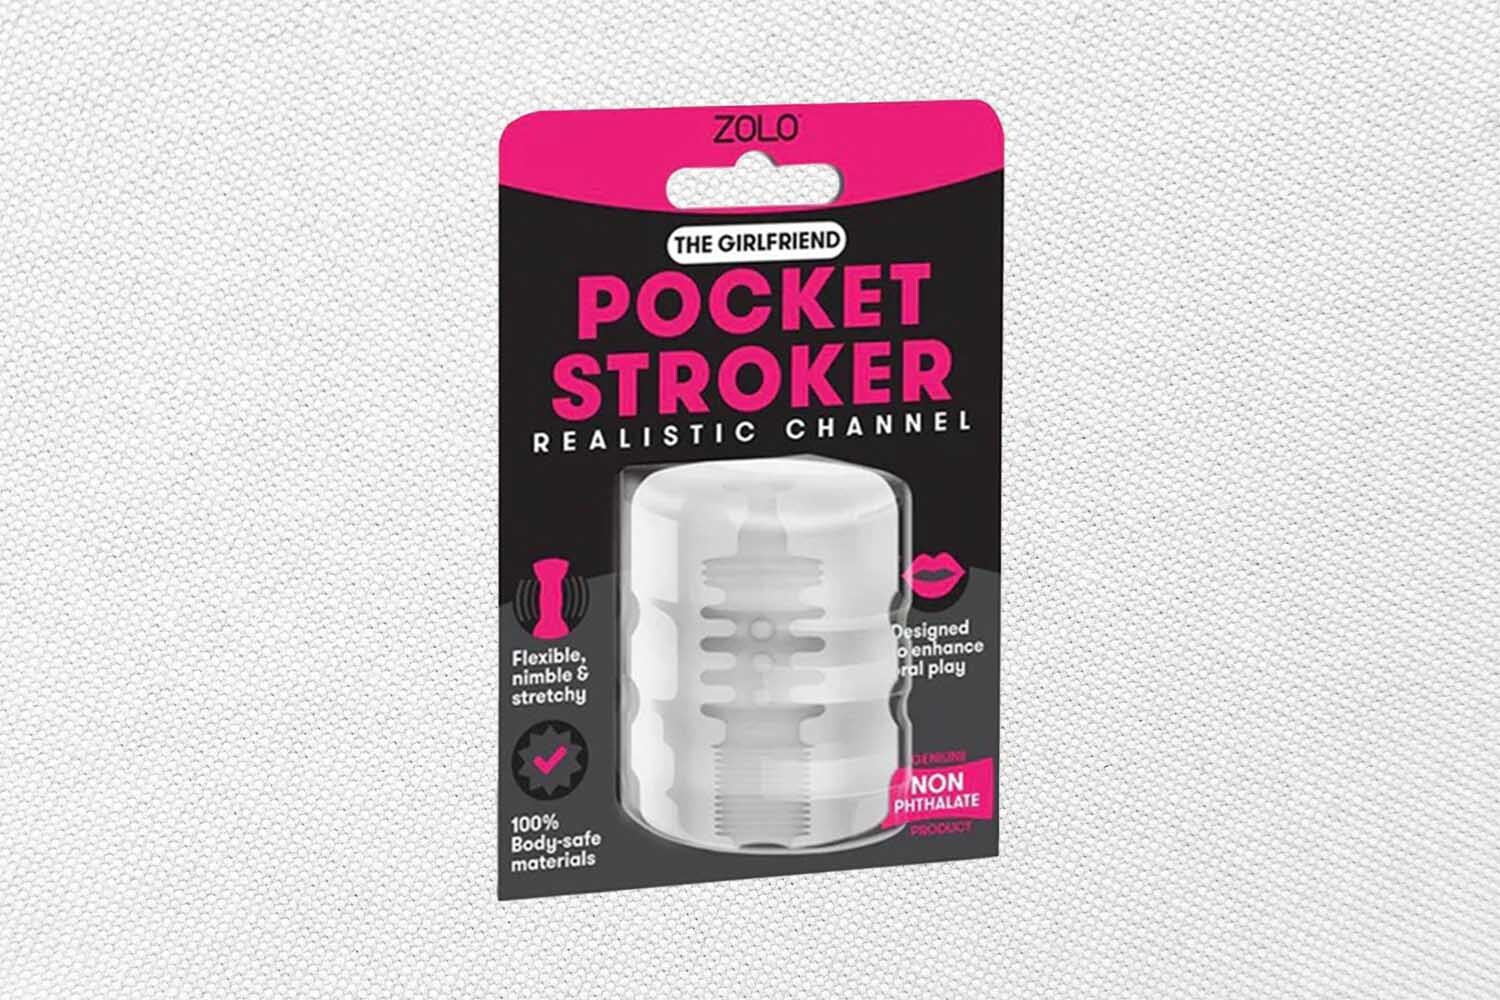 The Girlfriend pocket stroker on a white background.